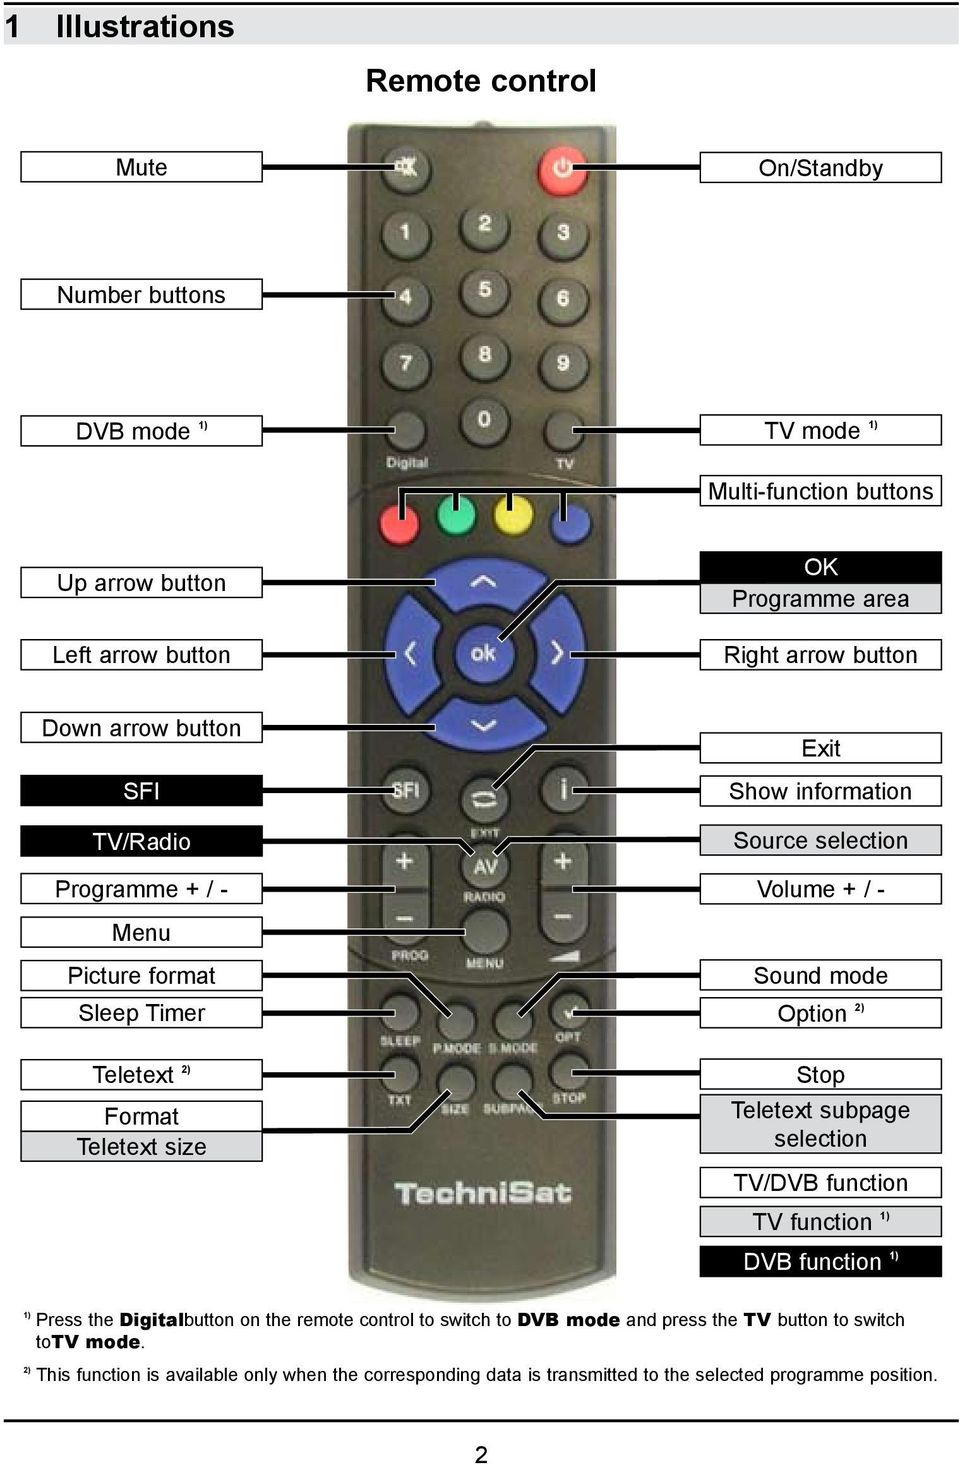 Teletext 2) Format Teletext size Stop Teletext subpage selection TV/DVB function TV function 1) DVB function 1) 1) Press the Digitalbutton on the remote control to